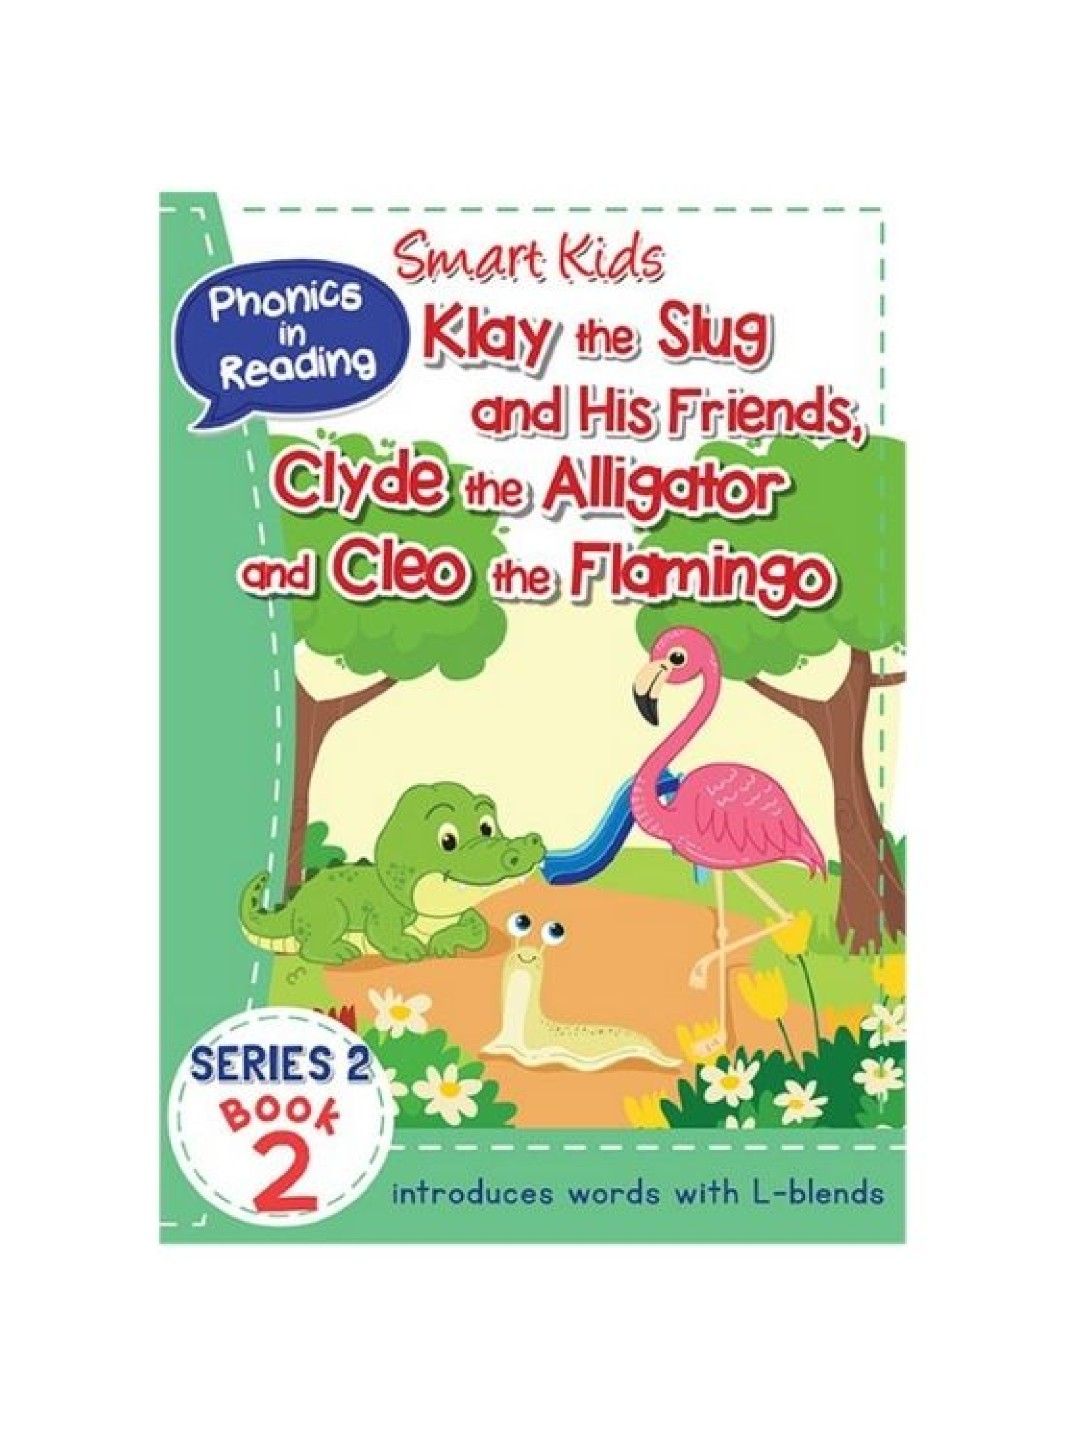 Learning is Fun Smart Kids Phonics In Reading Series 2 Book 2 - Klay And Friends, Clyde And Cleo